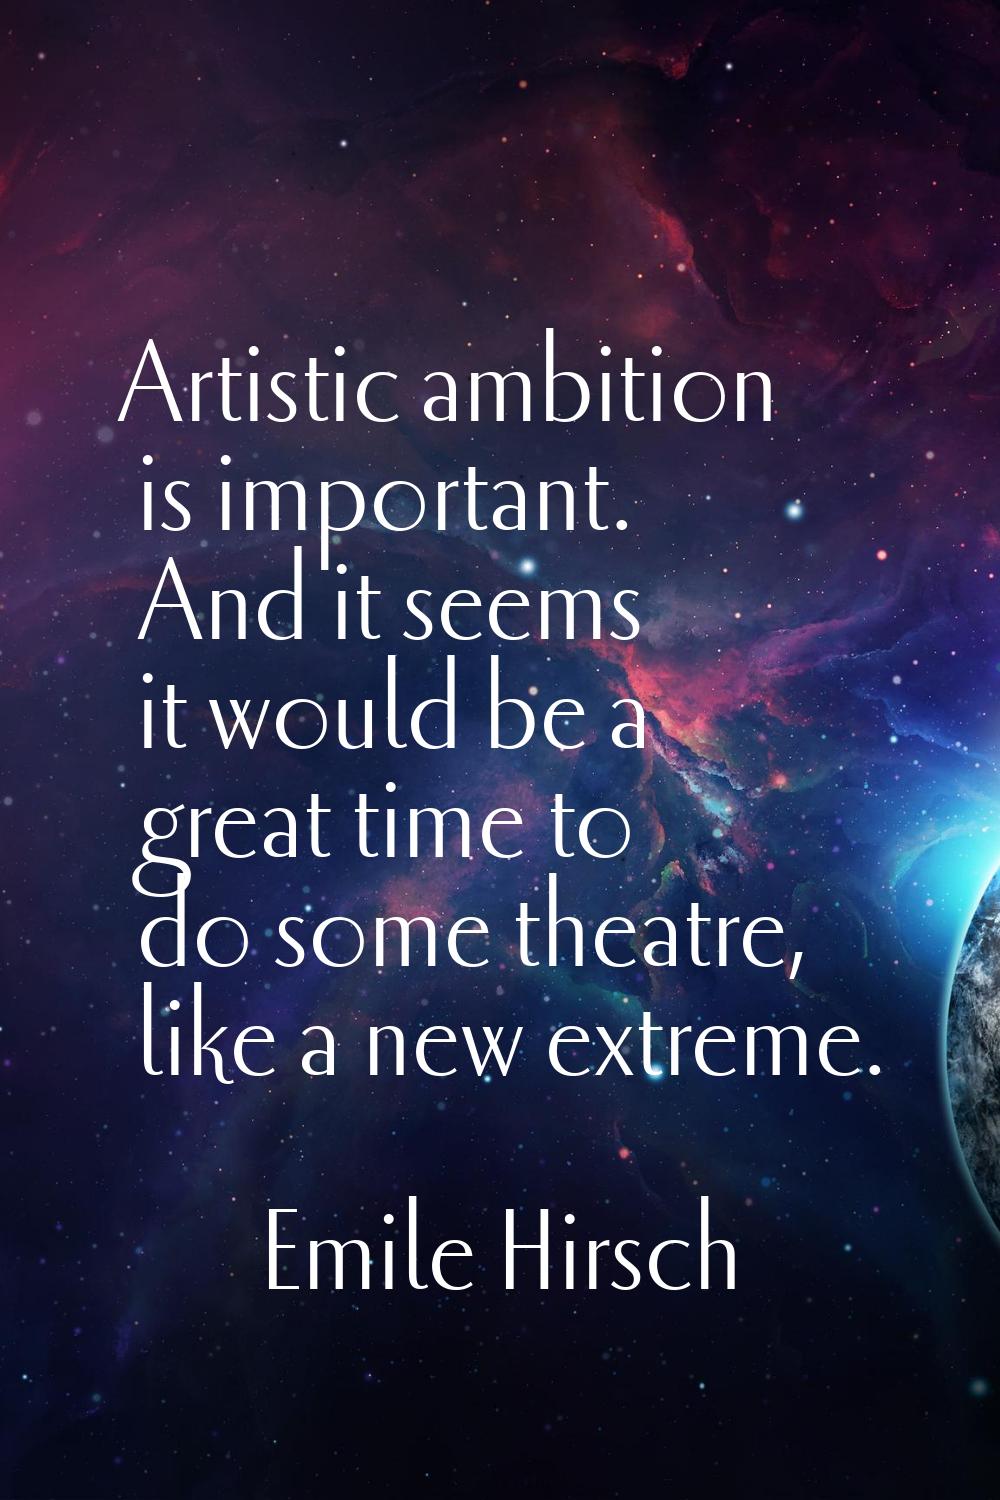 Artistic ambition is important. And it seems it would be a great time to do some theatre, like a ne